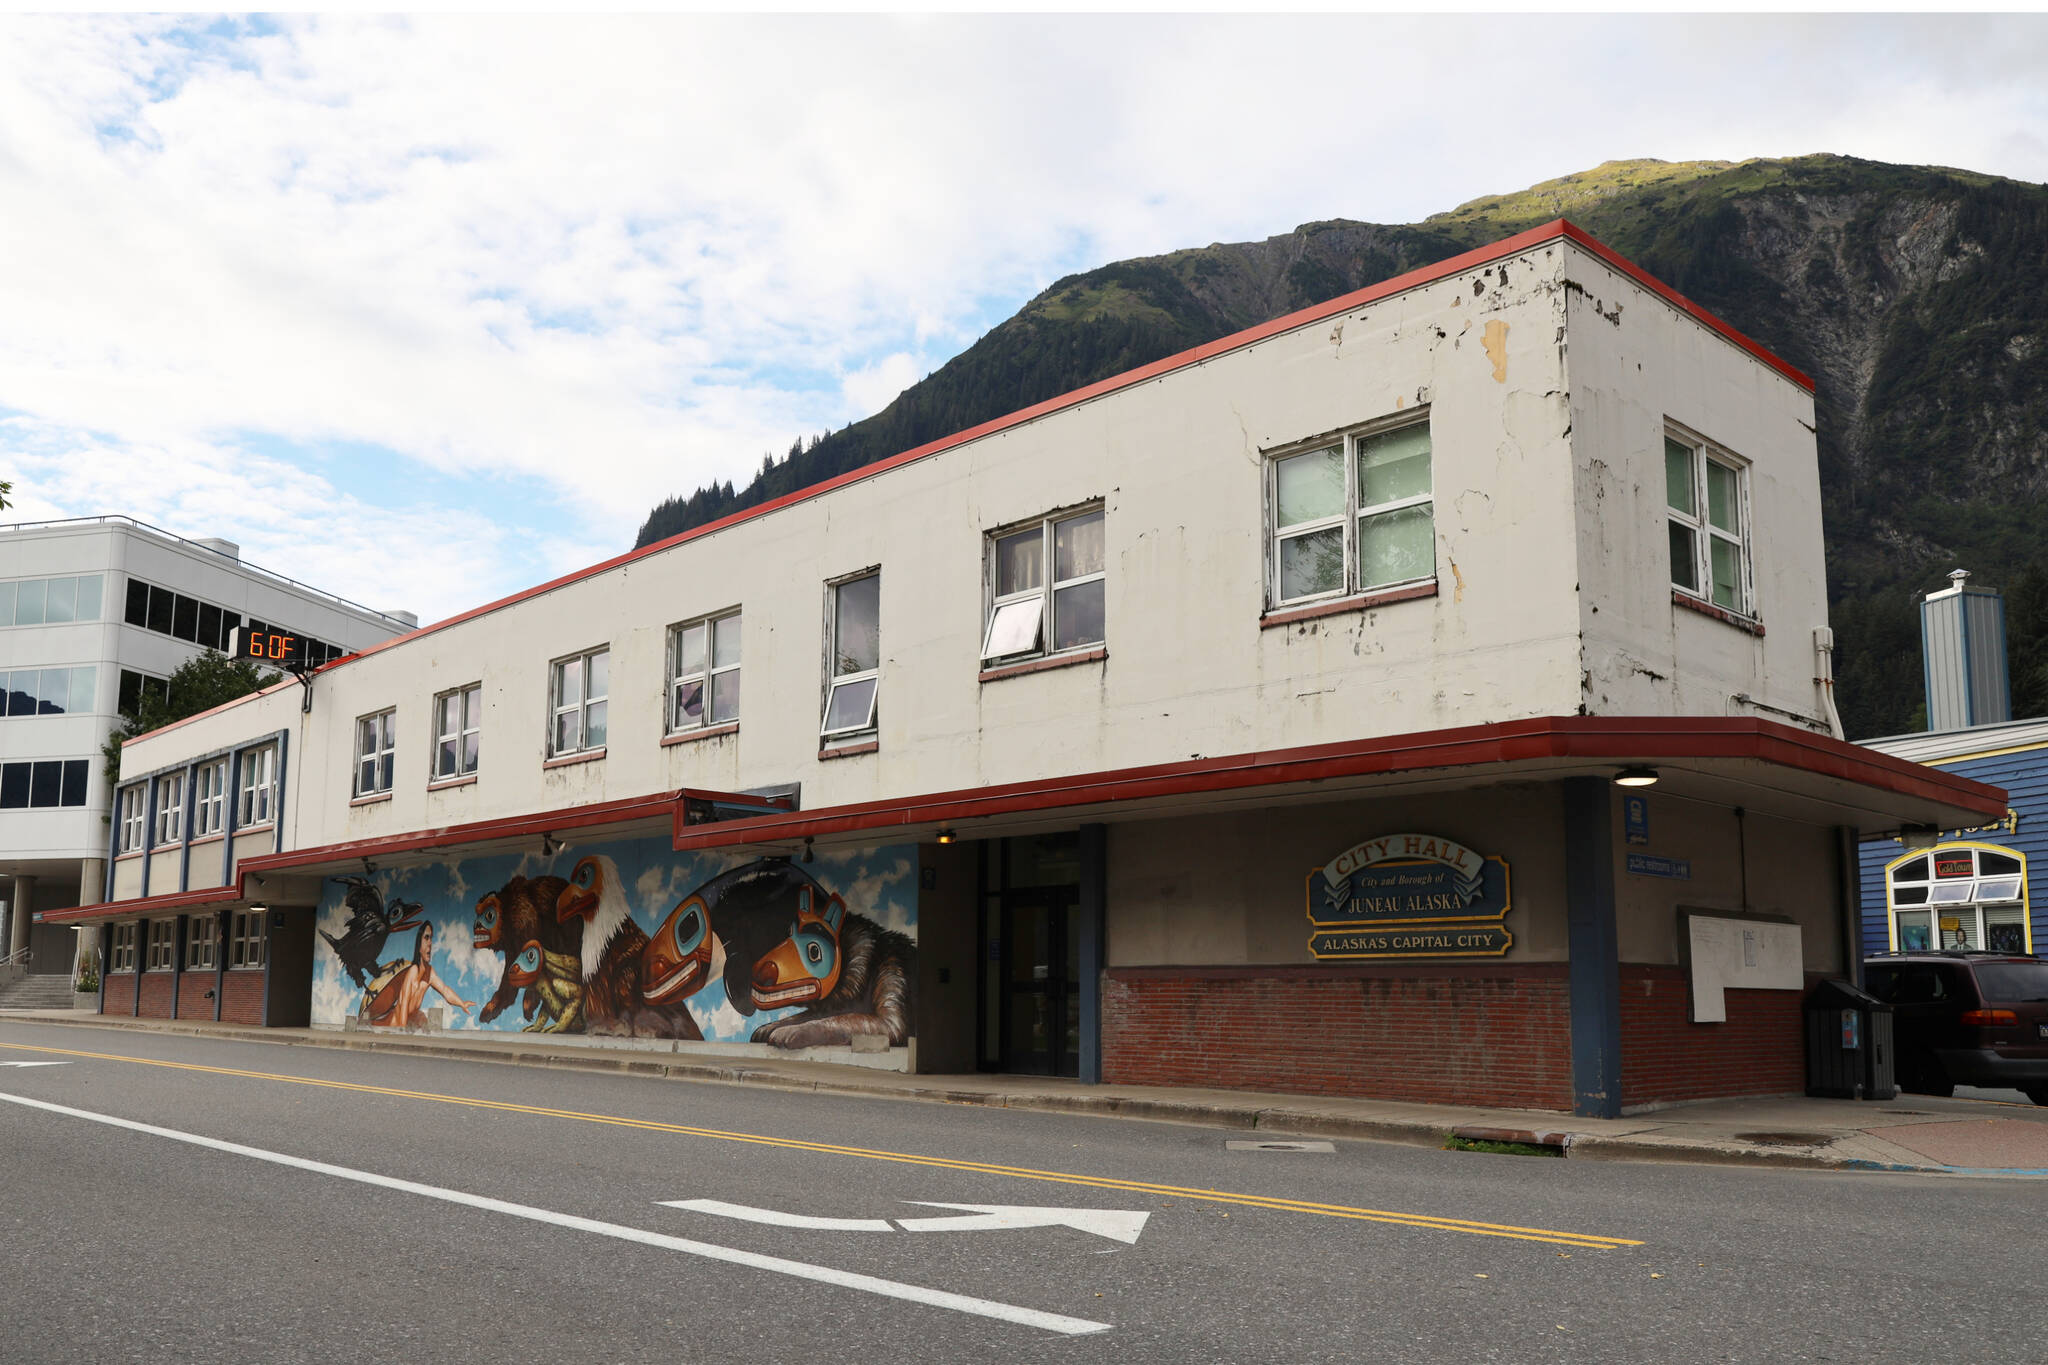 On Wednesday night, the City Borough of Juneau’s Assembly Finance Committee OK’d a motion to send an ordinance to the full Assembly, which would appropriate $700,000 to fund a predevelopment loan for the proposed Gastineau Lodges project which, if developed, would create a 72-unit apartment building in downtown Juneau. (Clarise Larson / Juneau Empire)